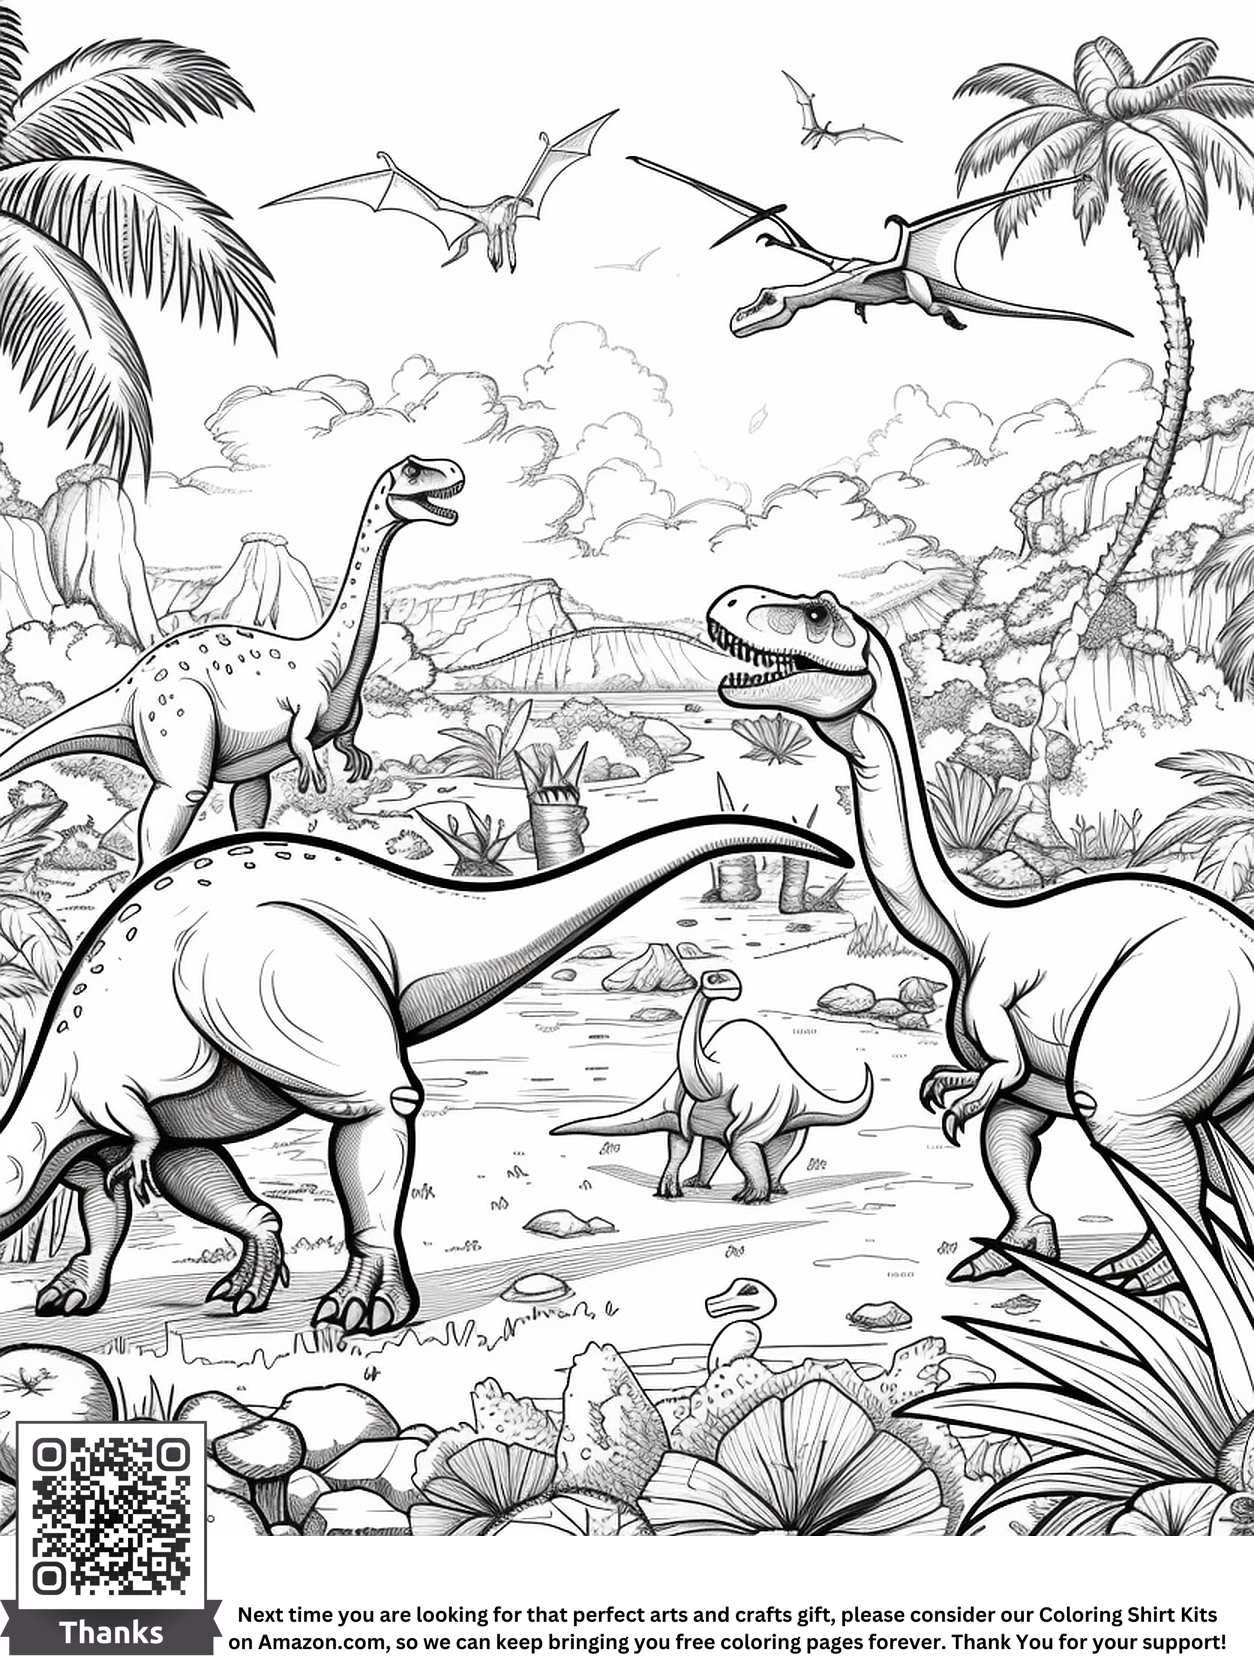 "2000+ FREE Printable Dinosaur Coloring Pages: Majestic Black and